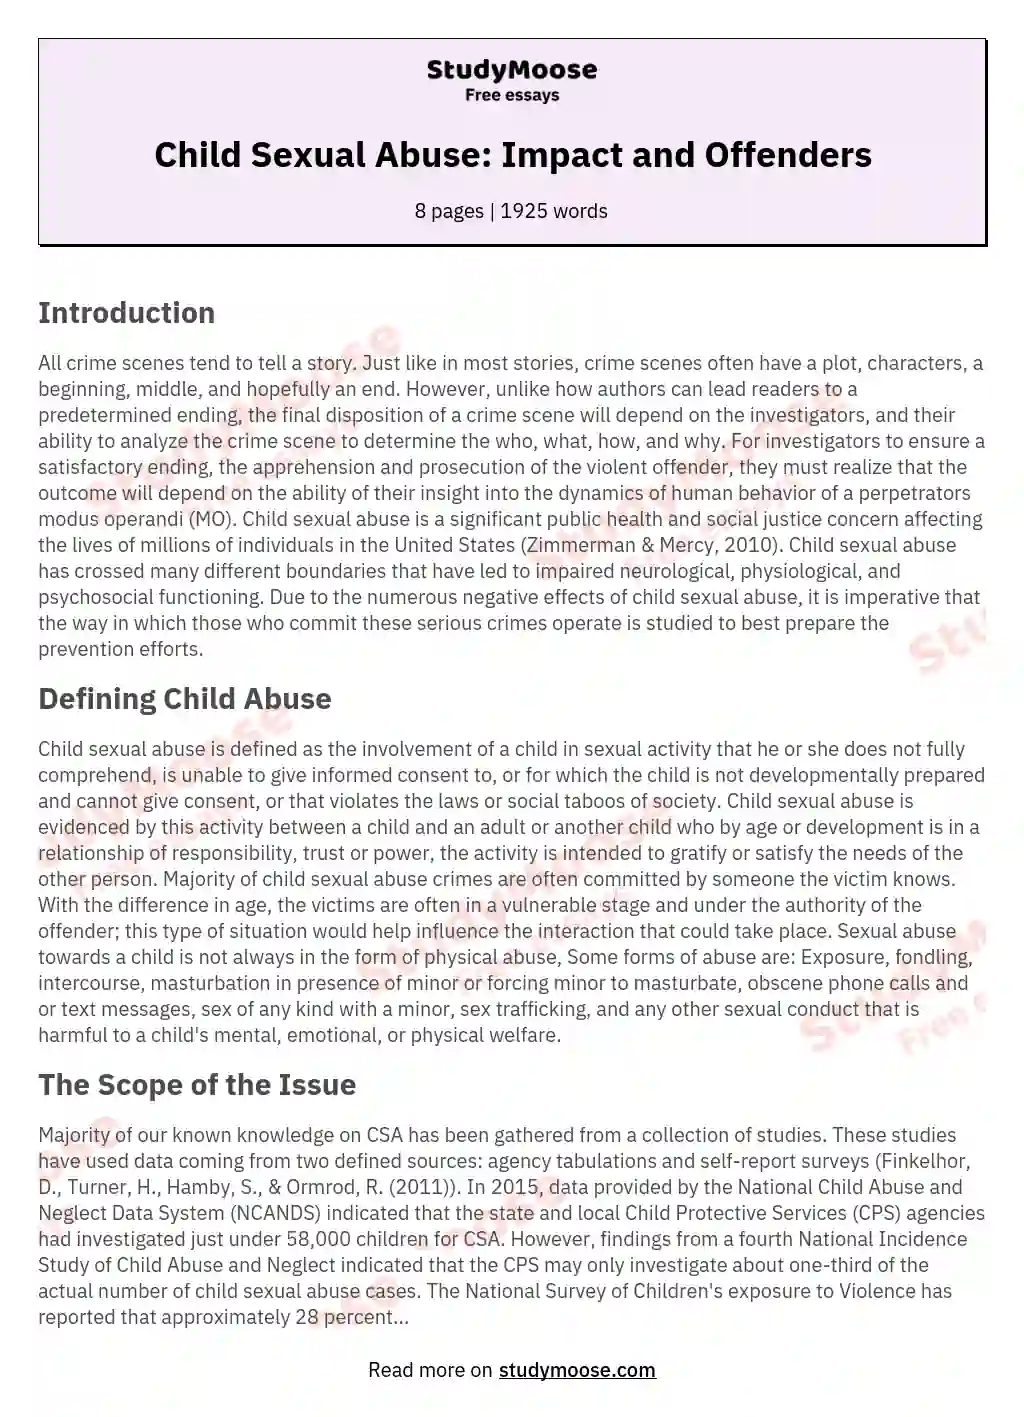 Child Sexual Abuse: Impact and Offenders essay